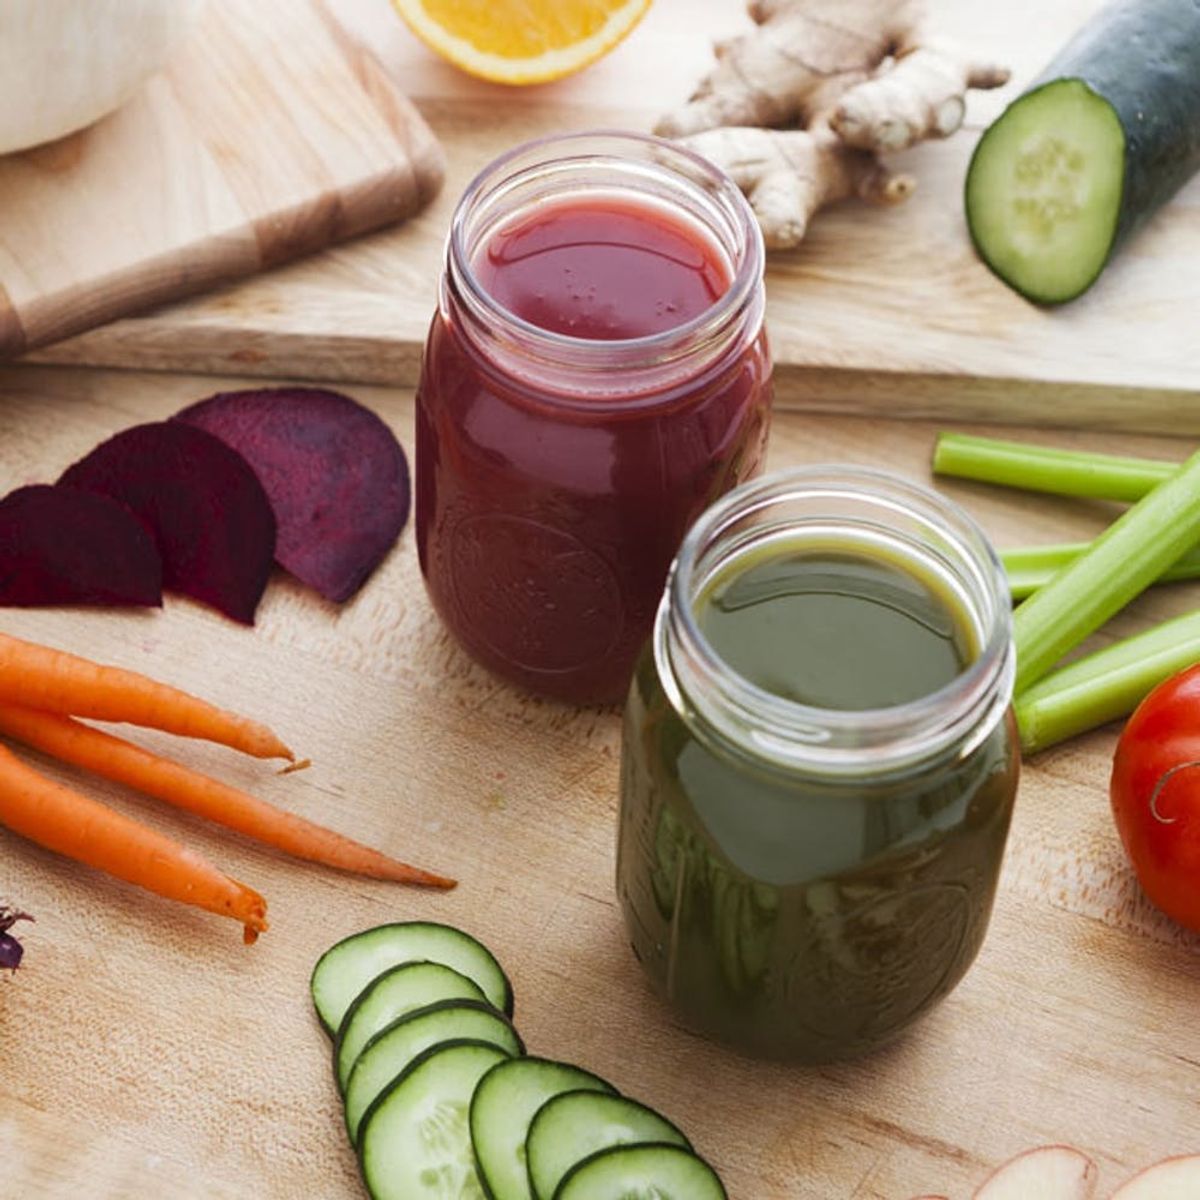 This Is the Juicing Guide You Need to Kick Off 2016